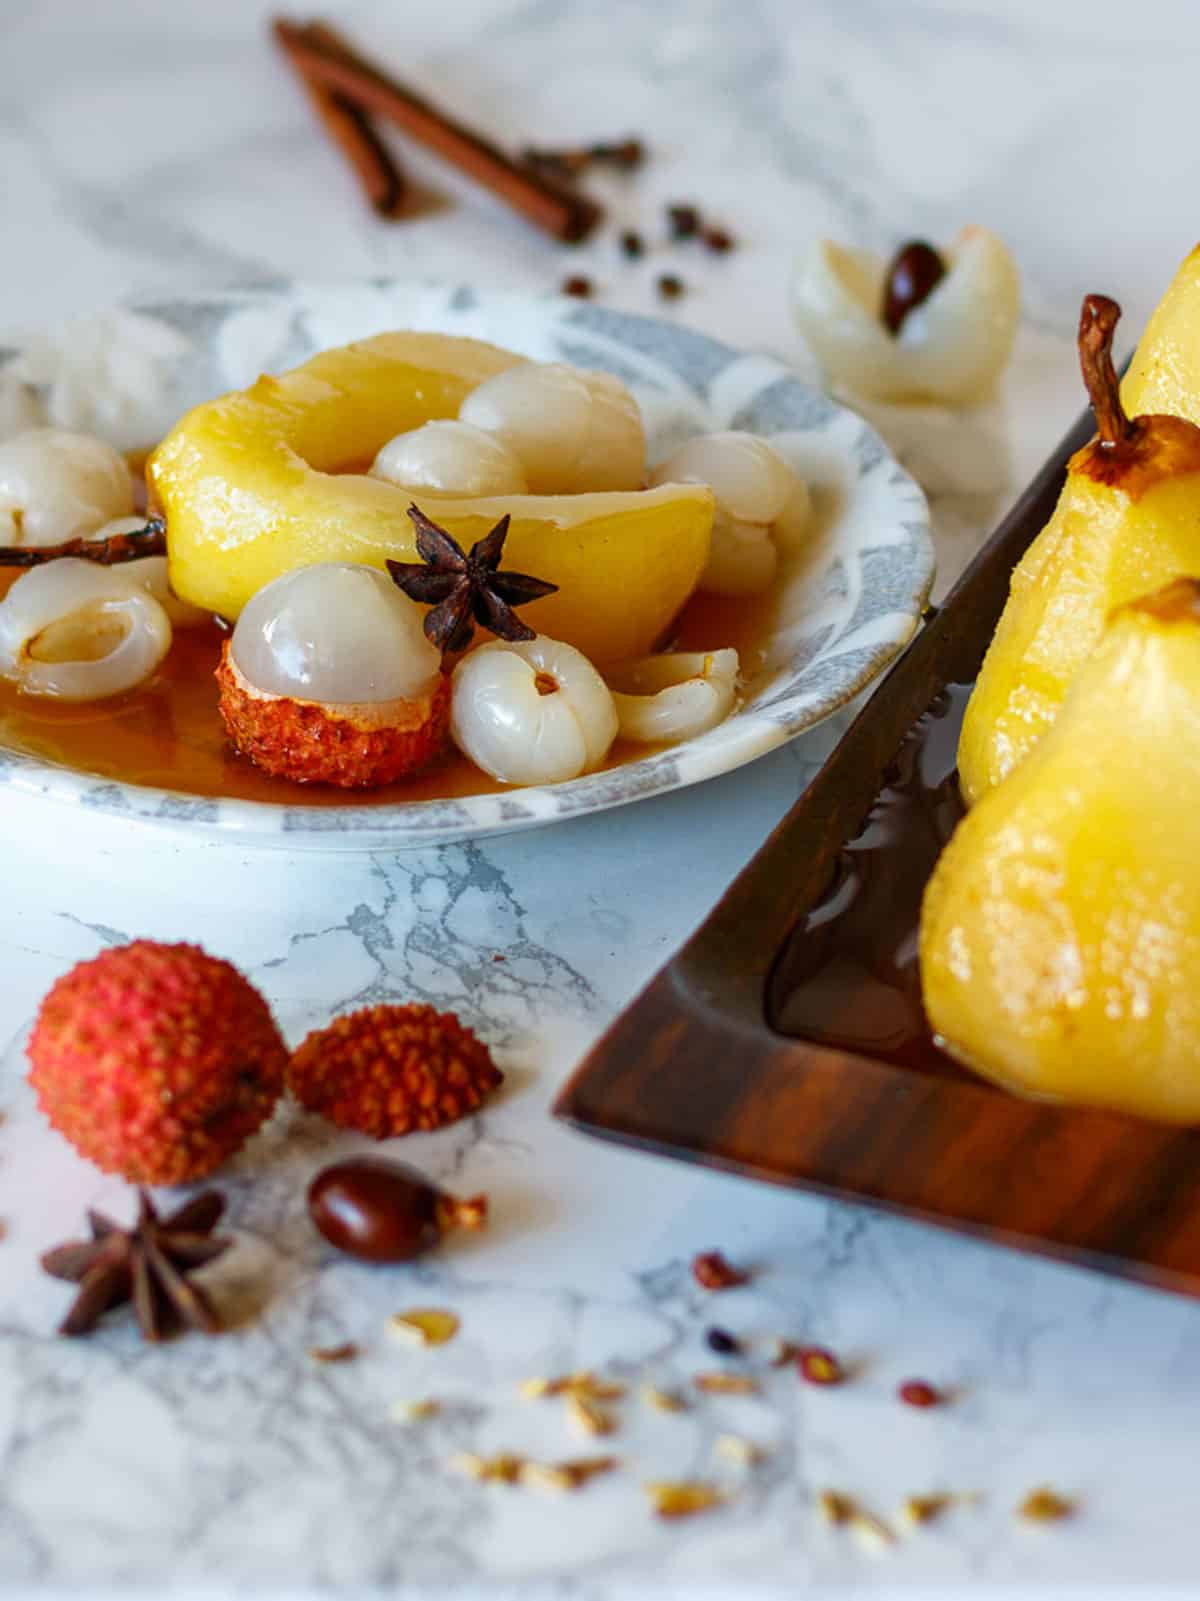 Pear poached in five spice syrup with chilled lychee.